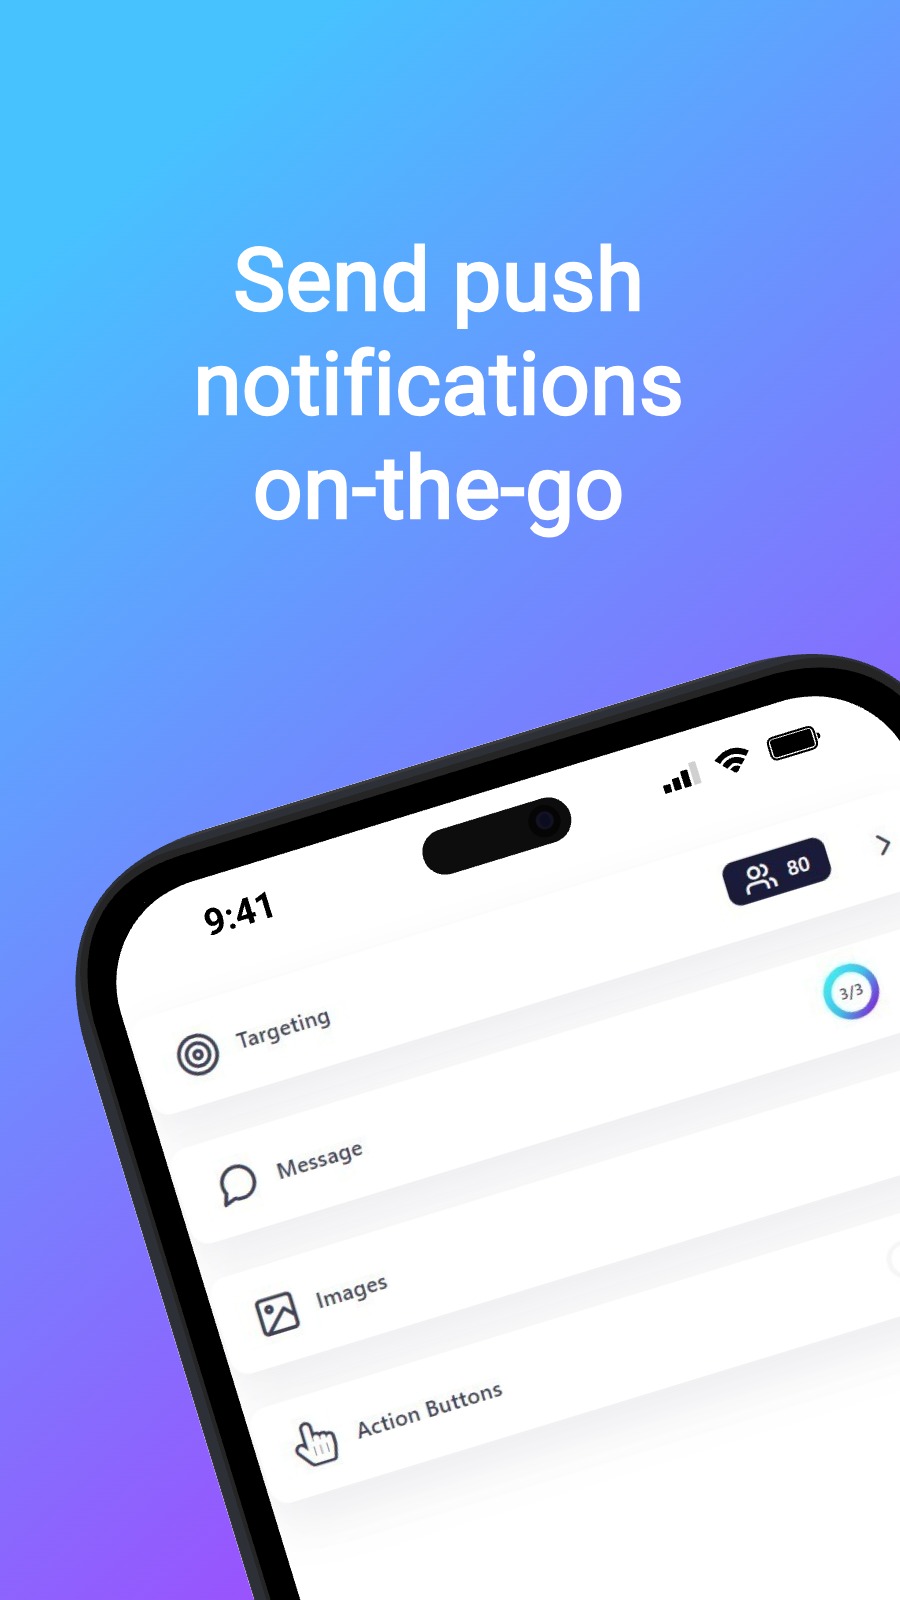 Send push notifications on-the-go